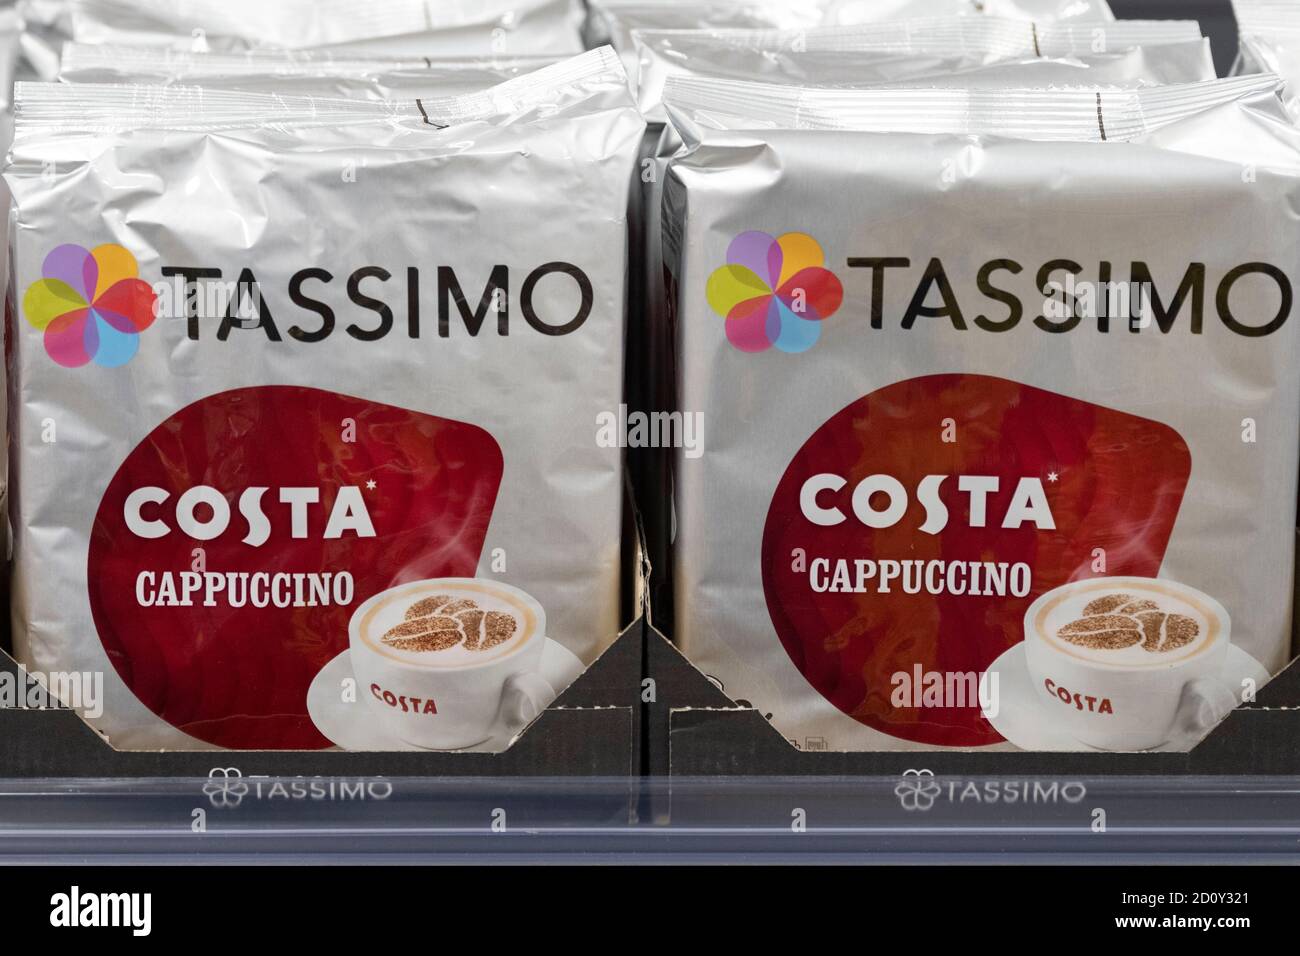 Packets of Costa Coffee Tassimo coffee capsules on sale on a shelf in a supermarket in Cardiff, Wales, United Kingdom. Stock Photo